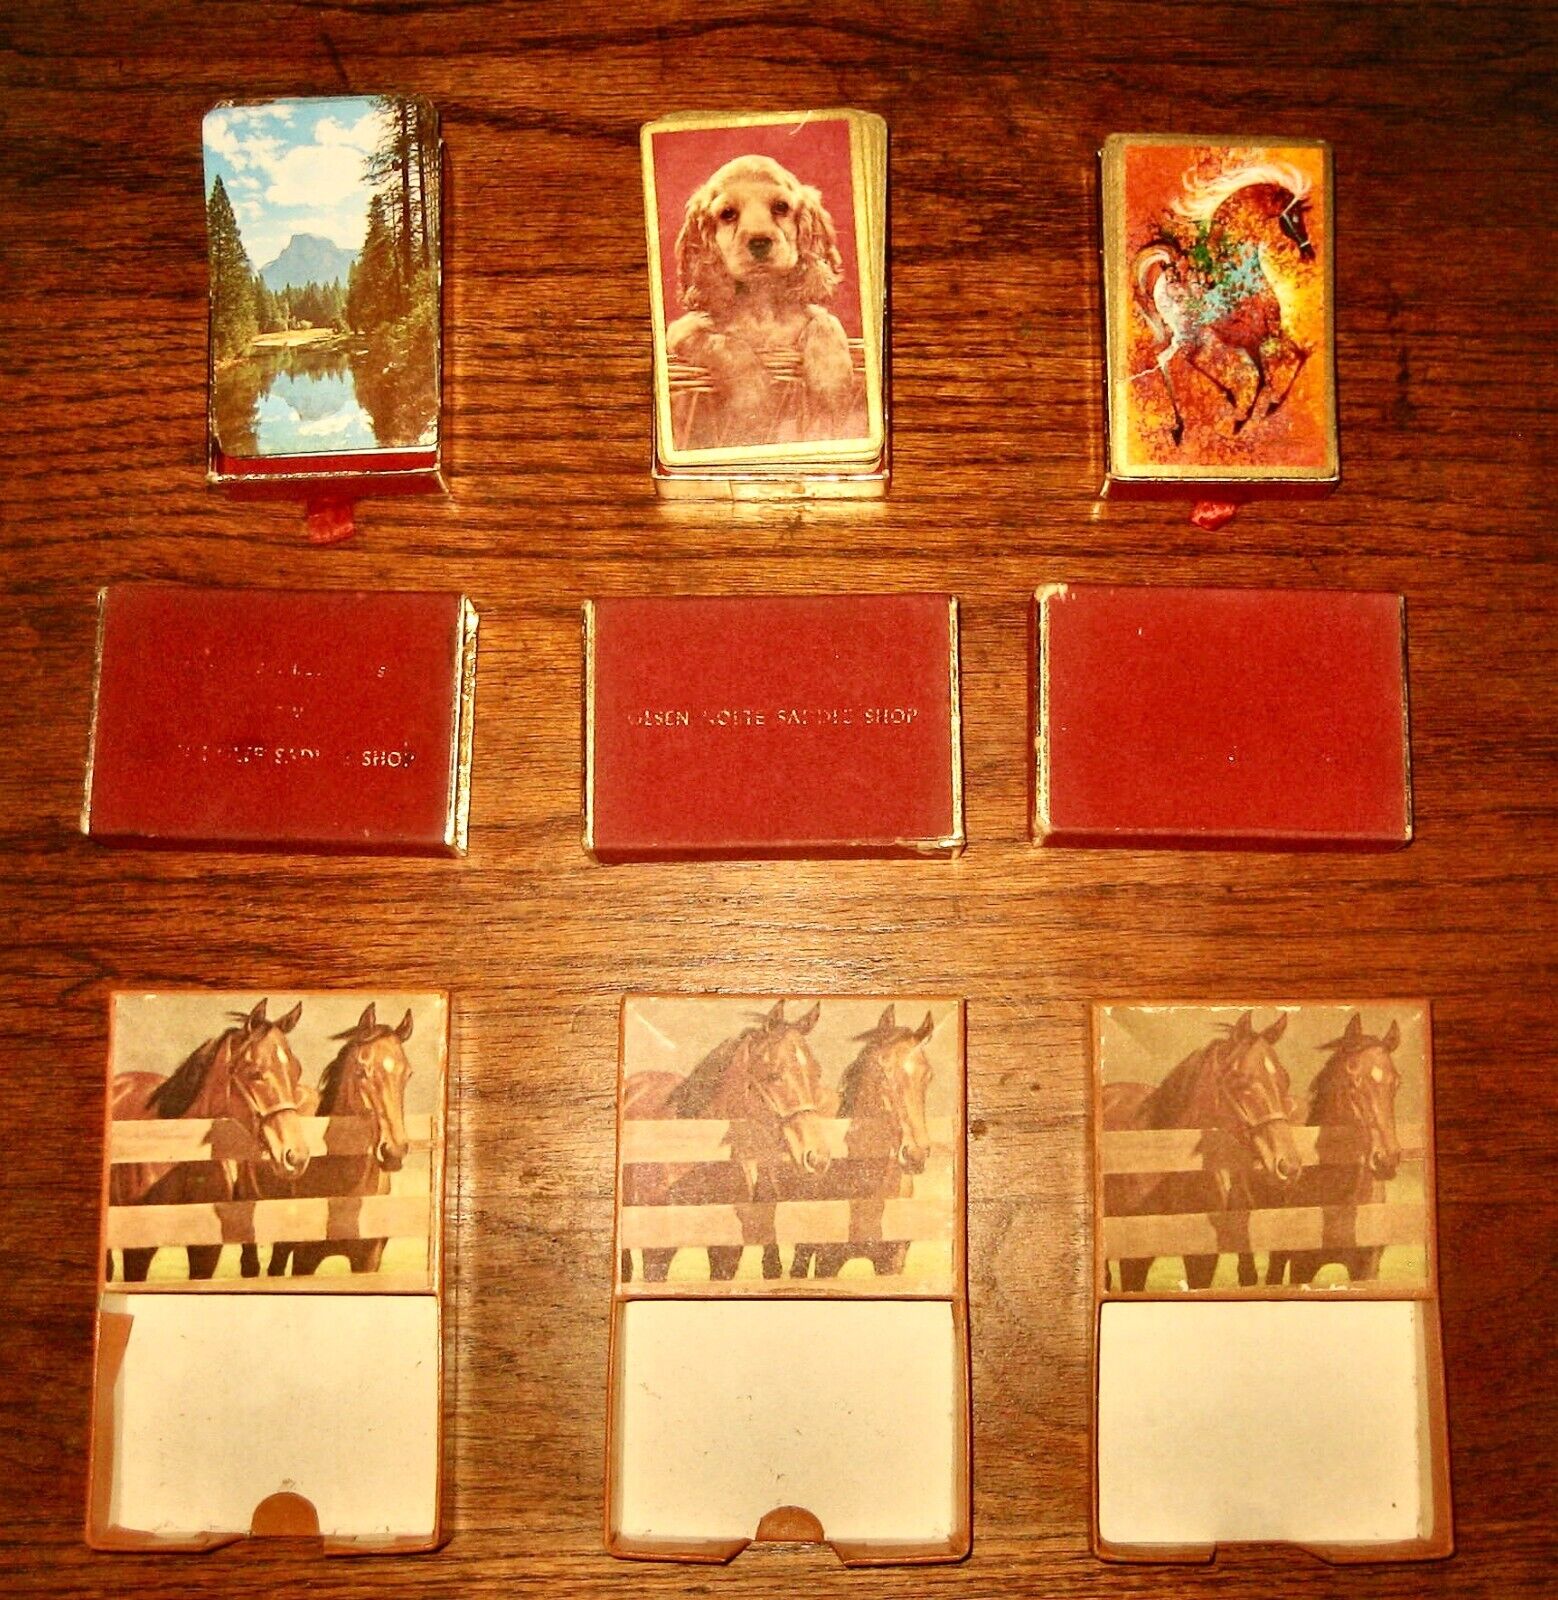 Olsen Nolte Saddle Shop ~ 3 Old Playing Card Decks + 3 Empty Horse Note Holders